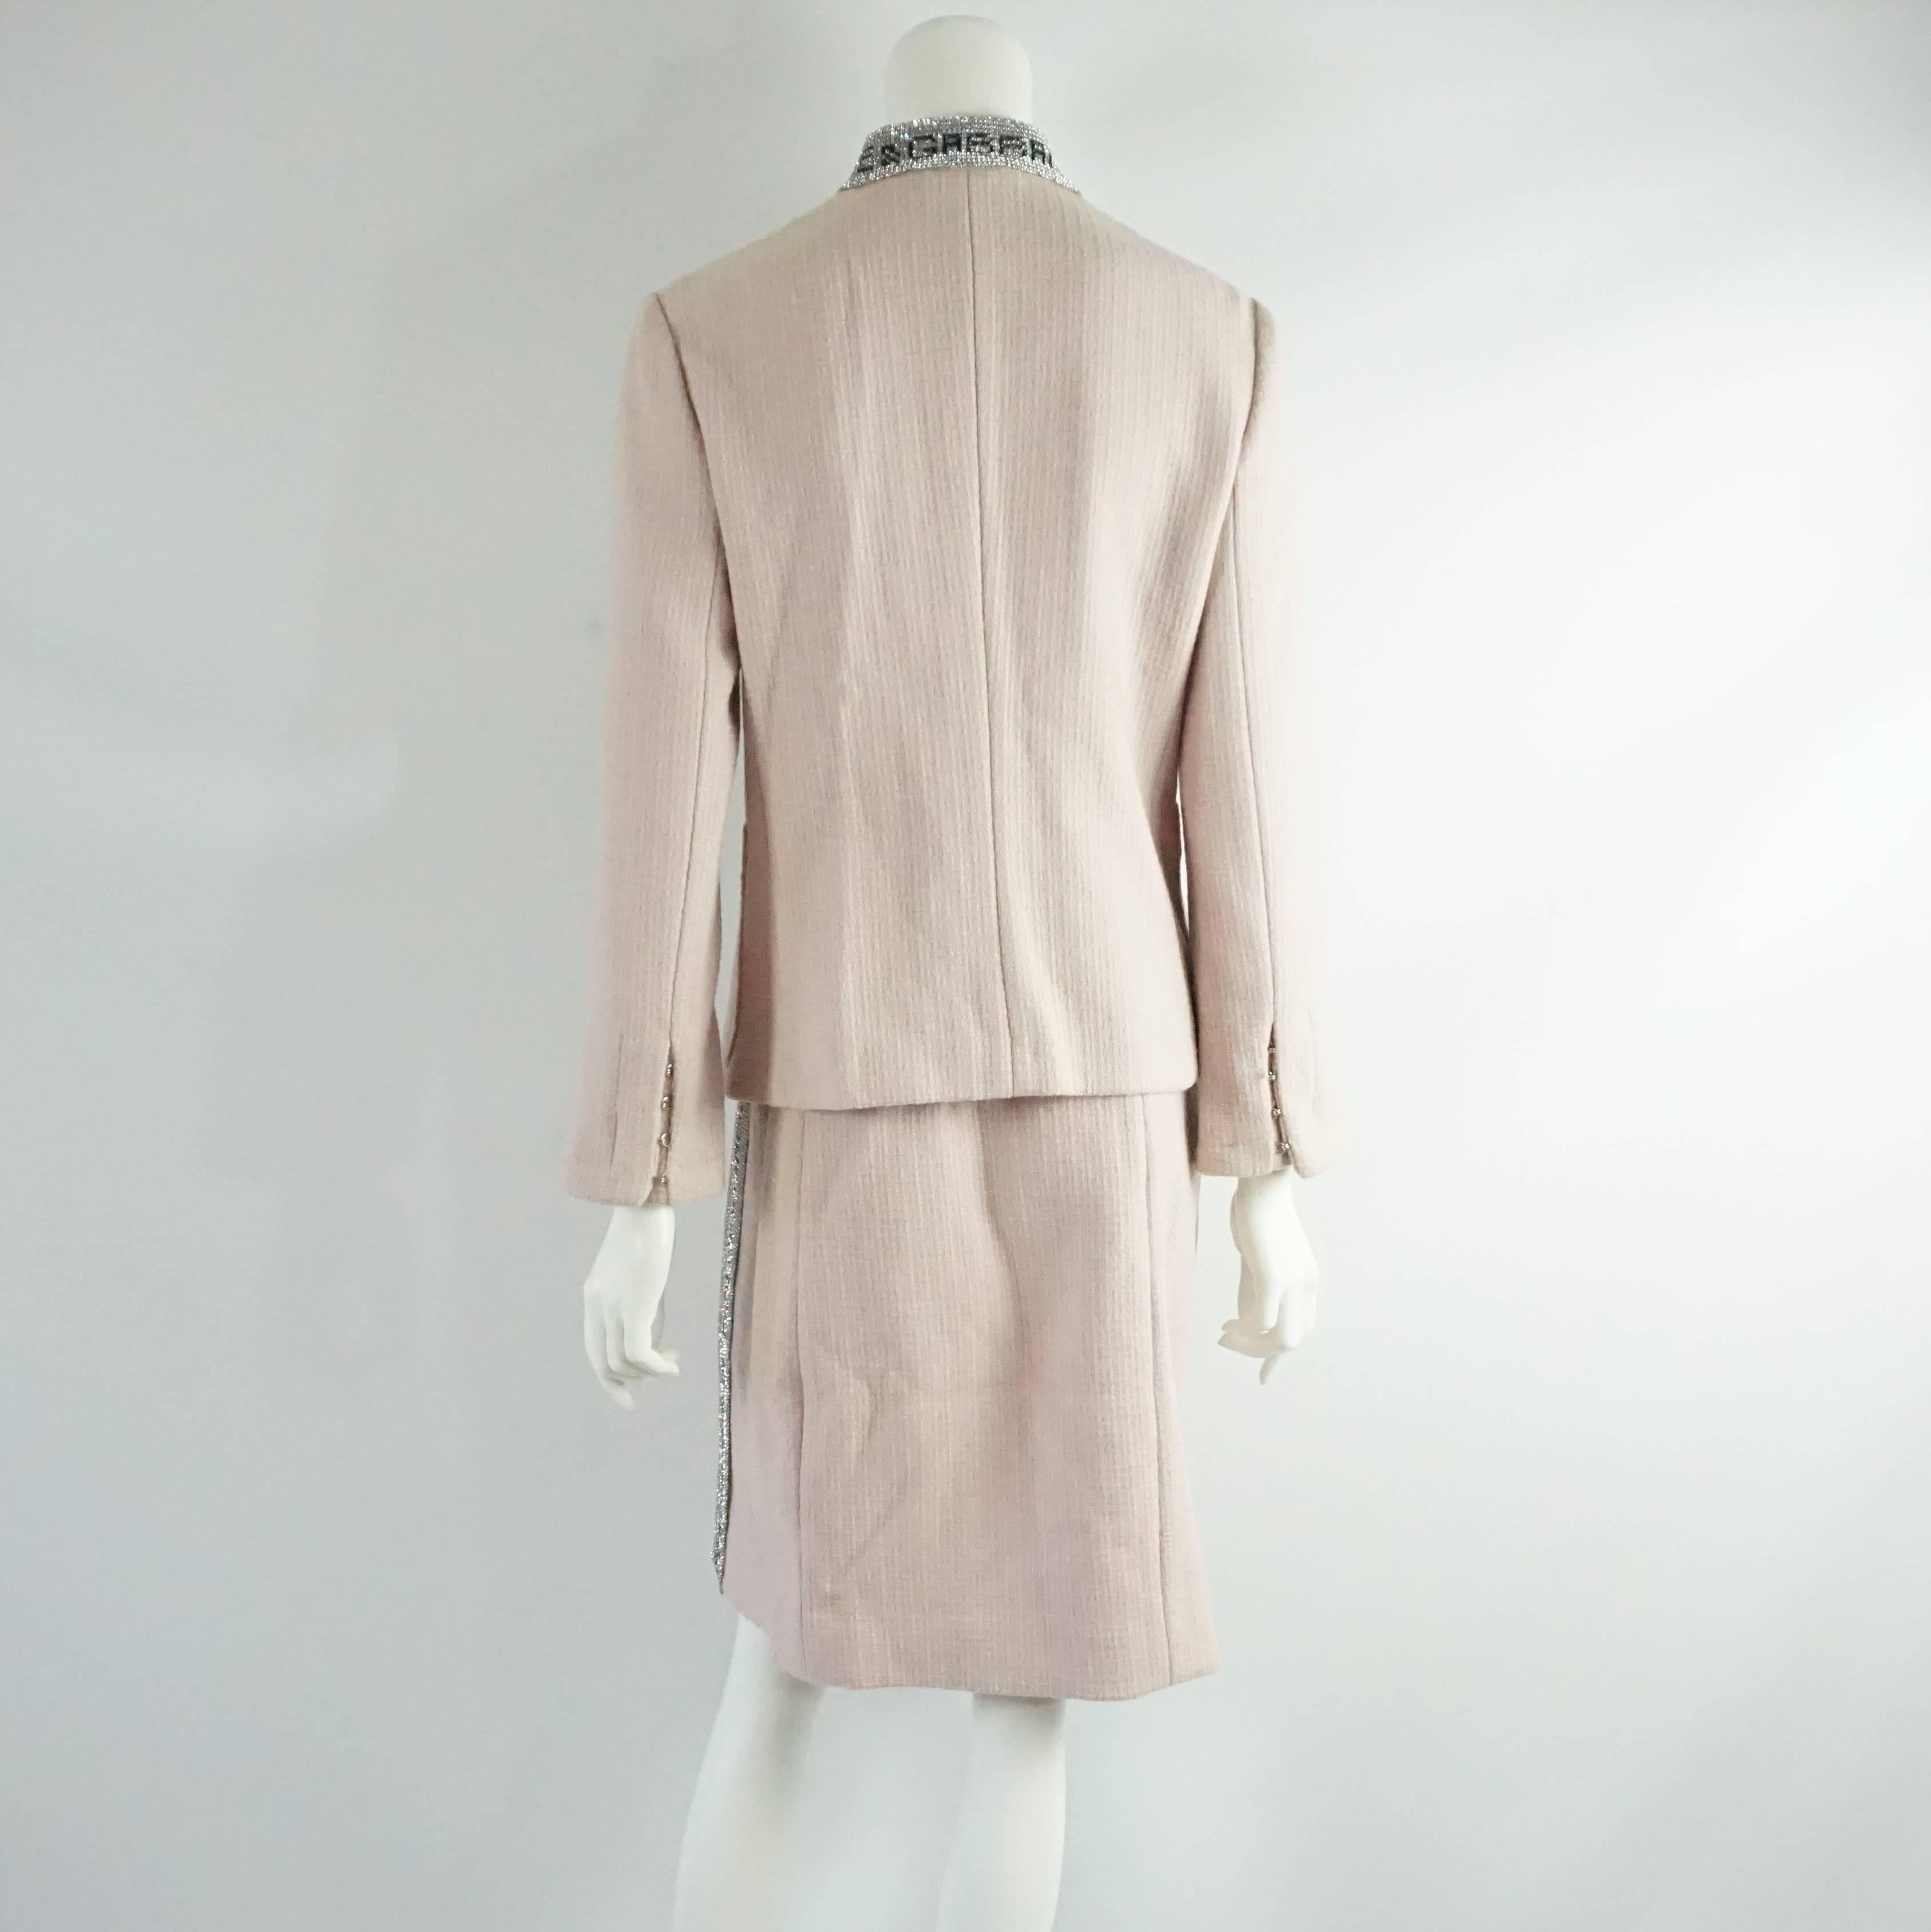 Beige Dolce & Gabbana Pink Tweed Skirt Suit with a Rhinestone Logo Trim - Size 44 For Sale